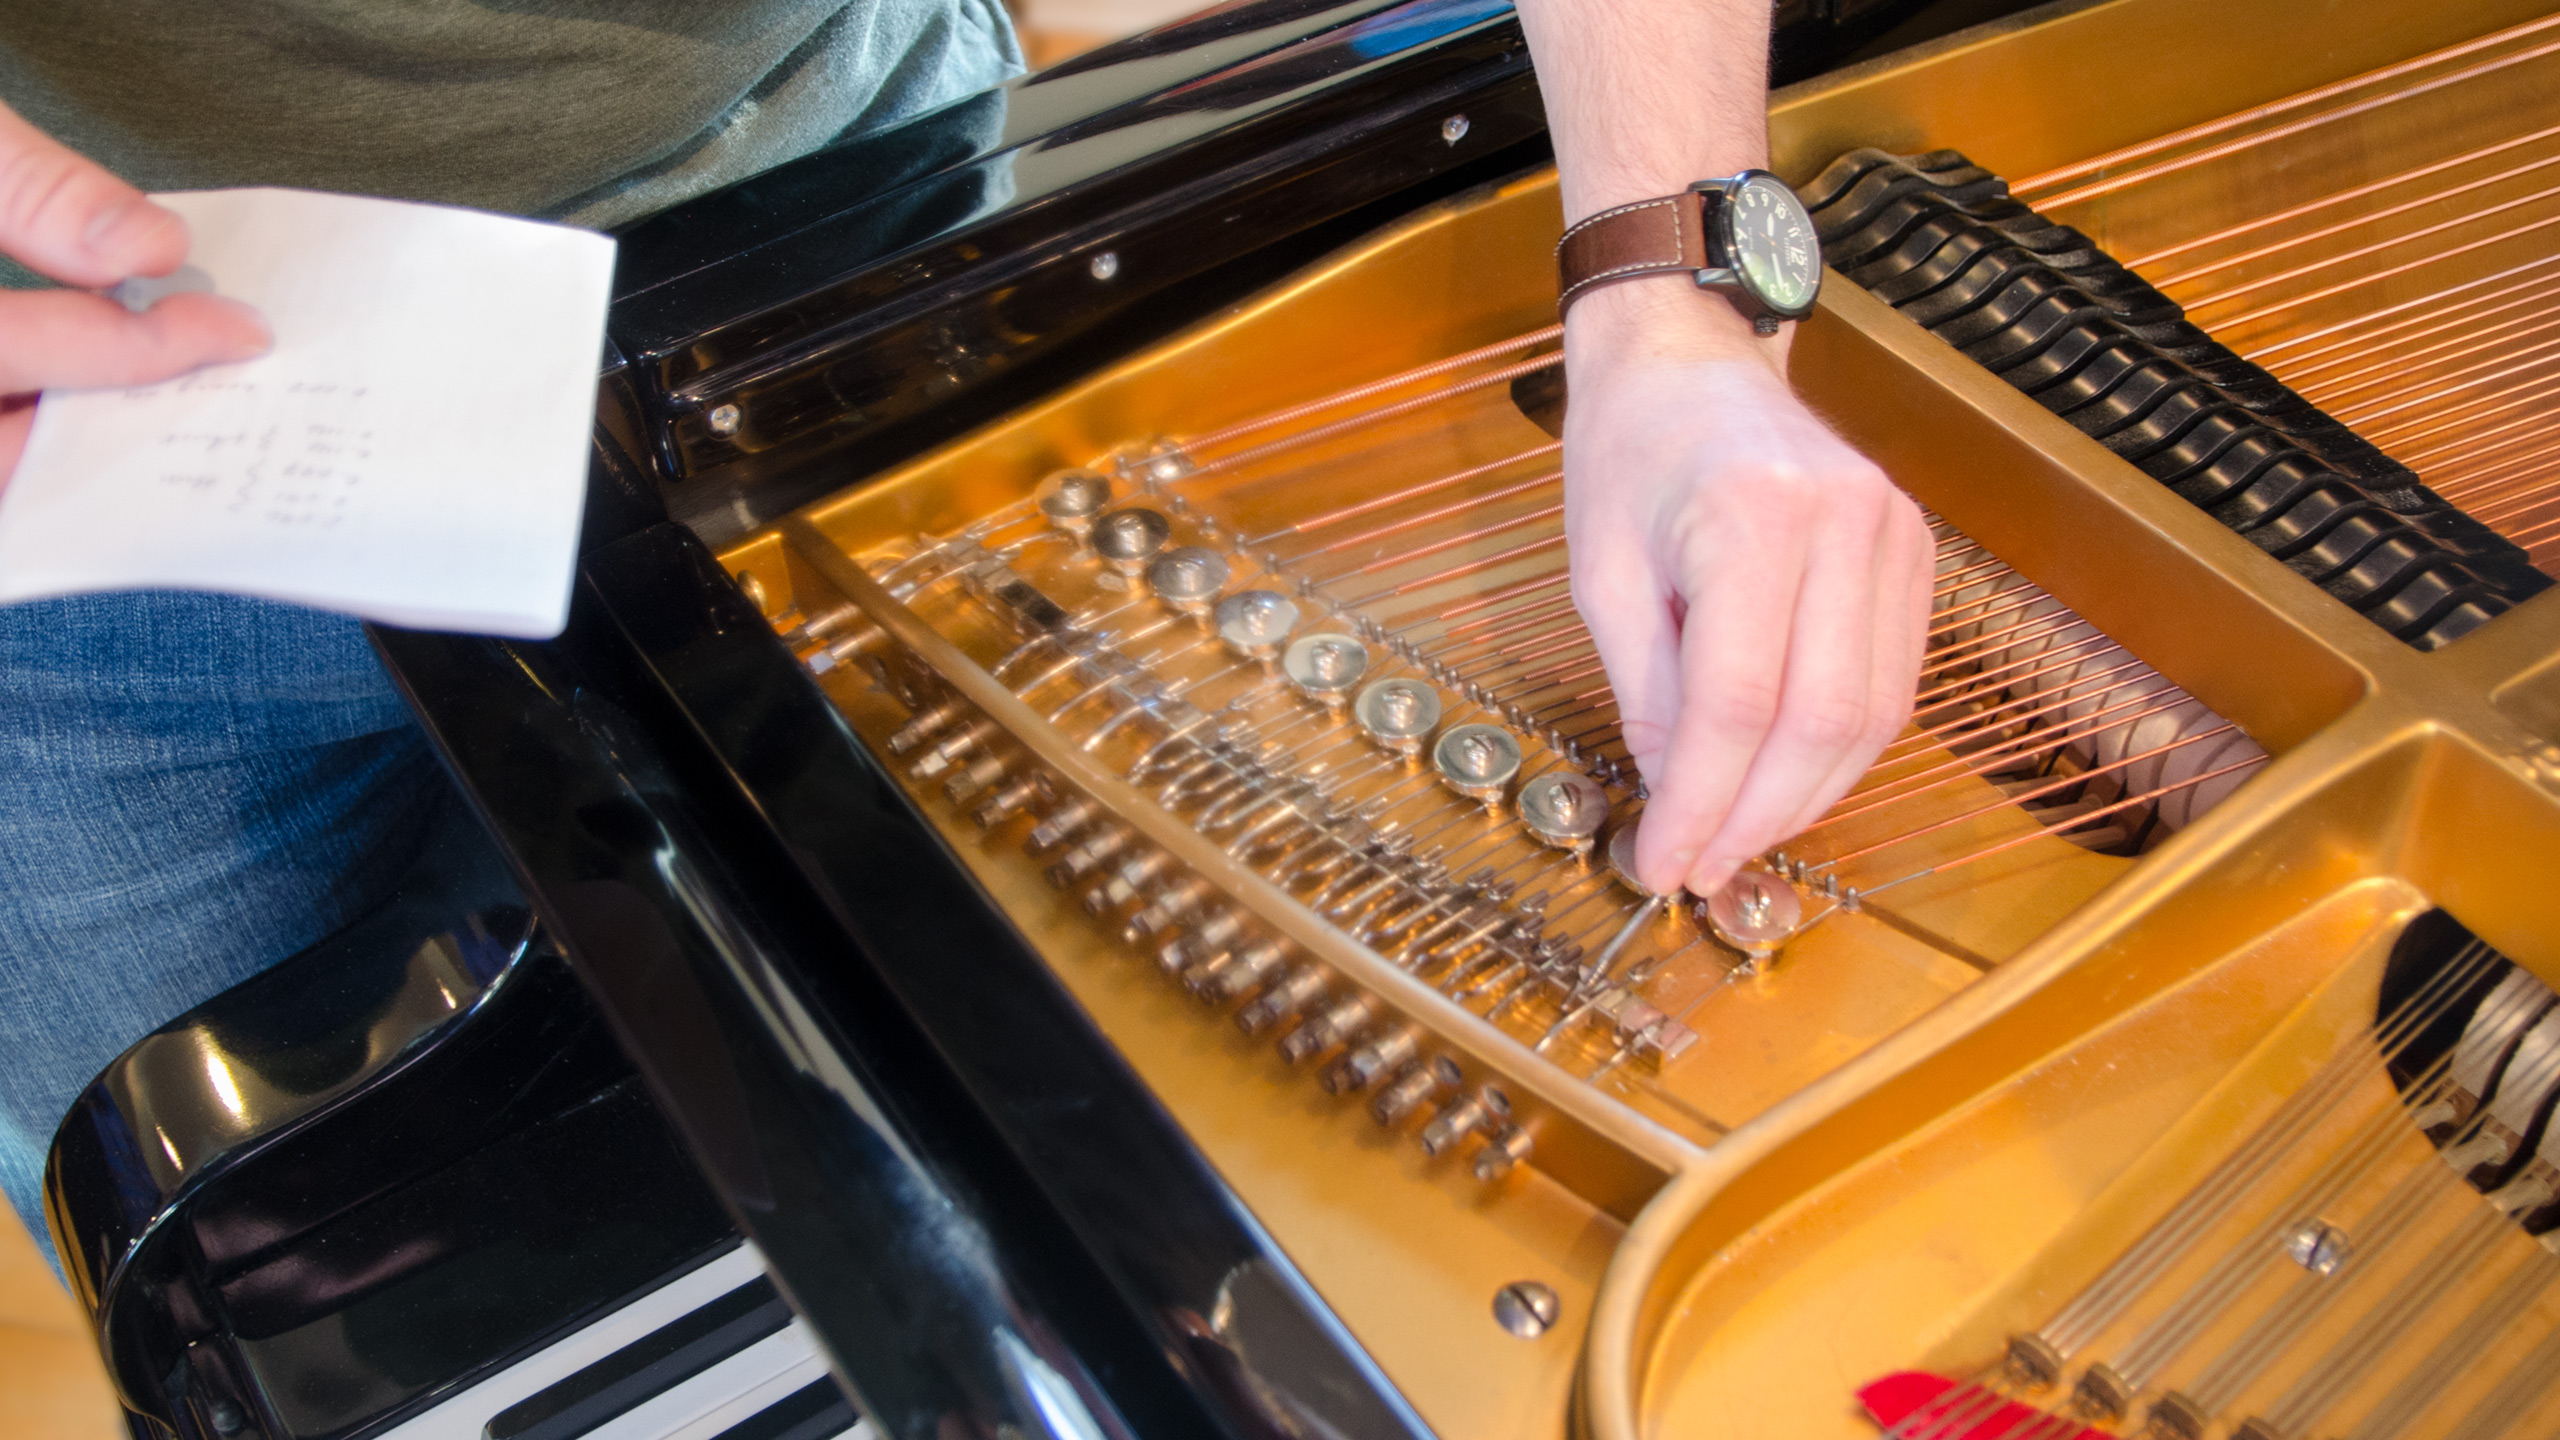 Matthew White takes on the challenge of 3D-printing parts for a concert-grande piano from the 1890s